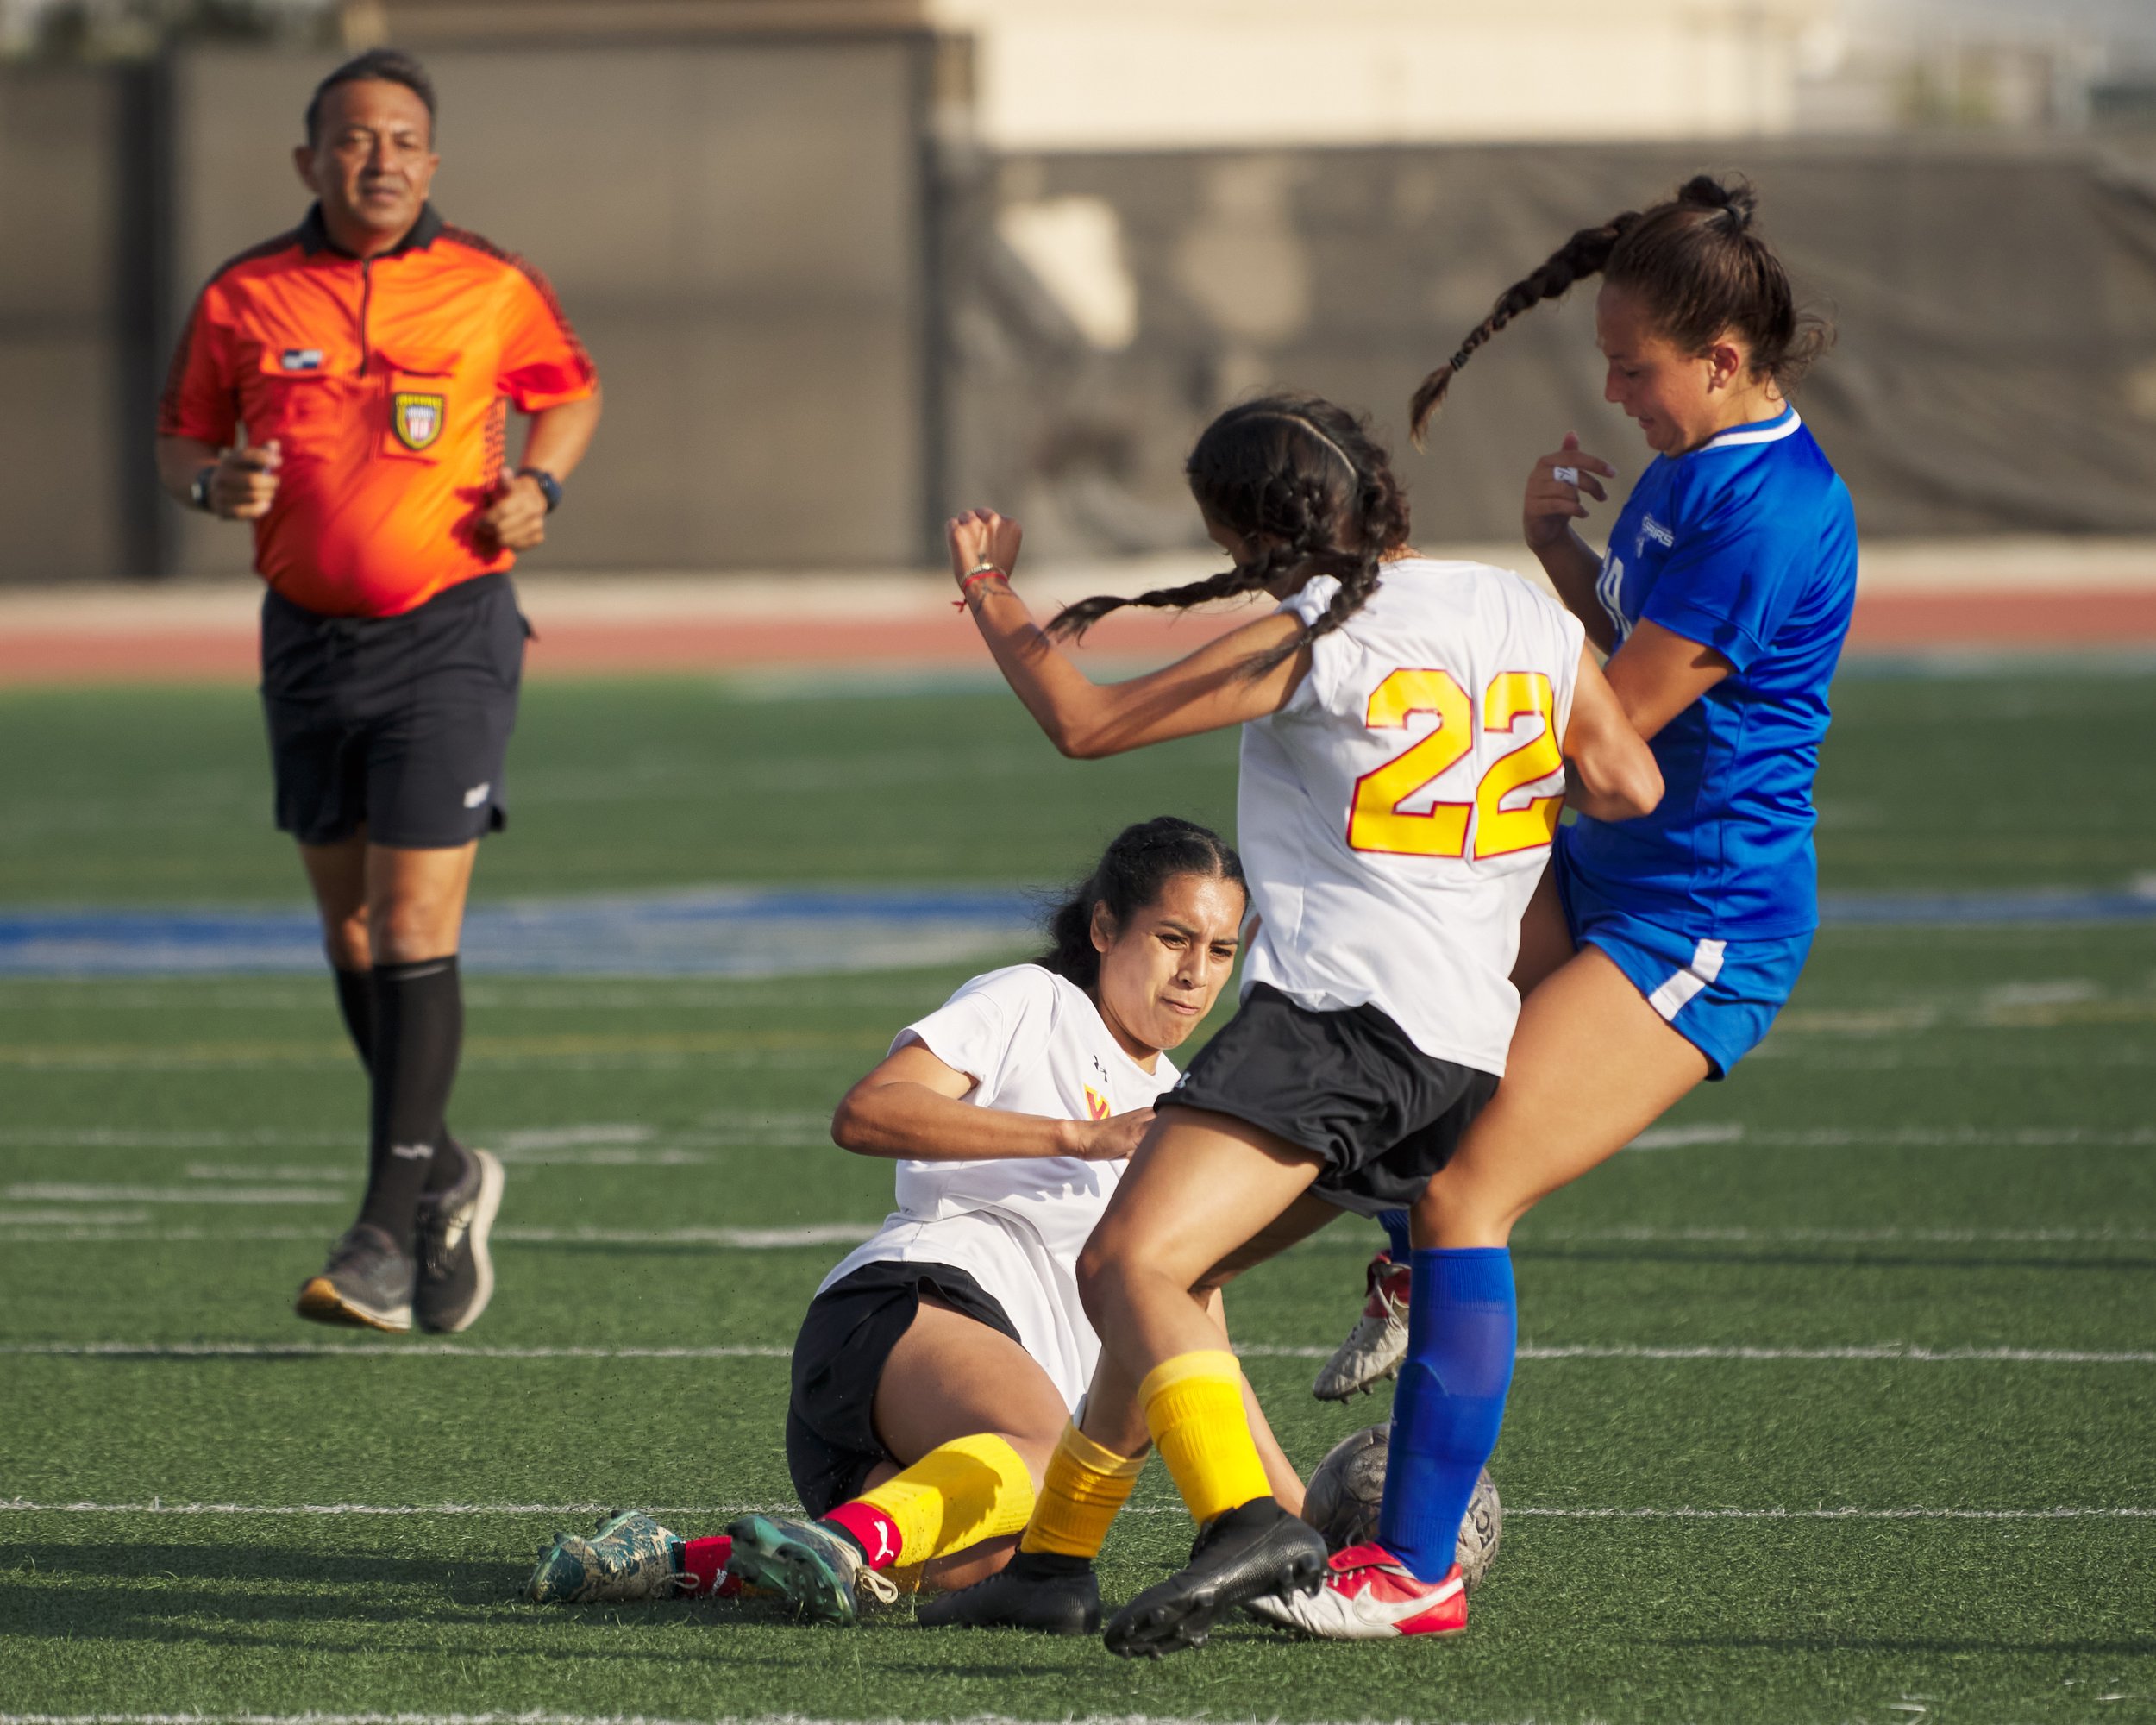  Glendale Community College Vaqueros' Stephanie Portillo fouls her way into a collsion with Santi Eldimiri and Santa Monica College Corsairs' Layla Perovich during the women's soccer match on Friday, Oct. 21, 2022, at Corsair Field in Santa Monica, C